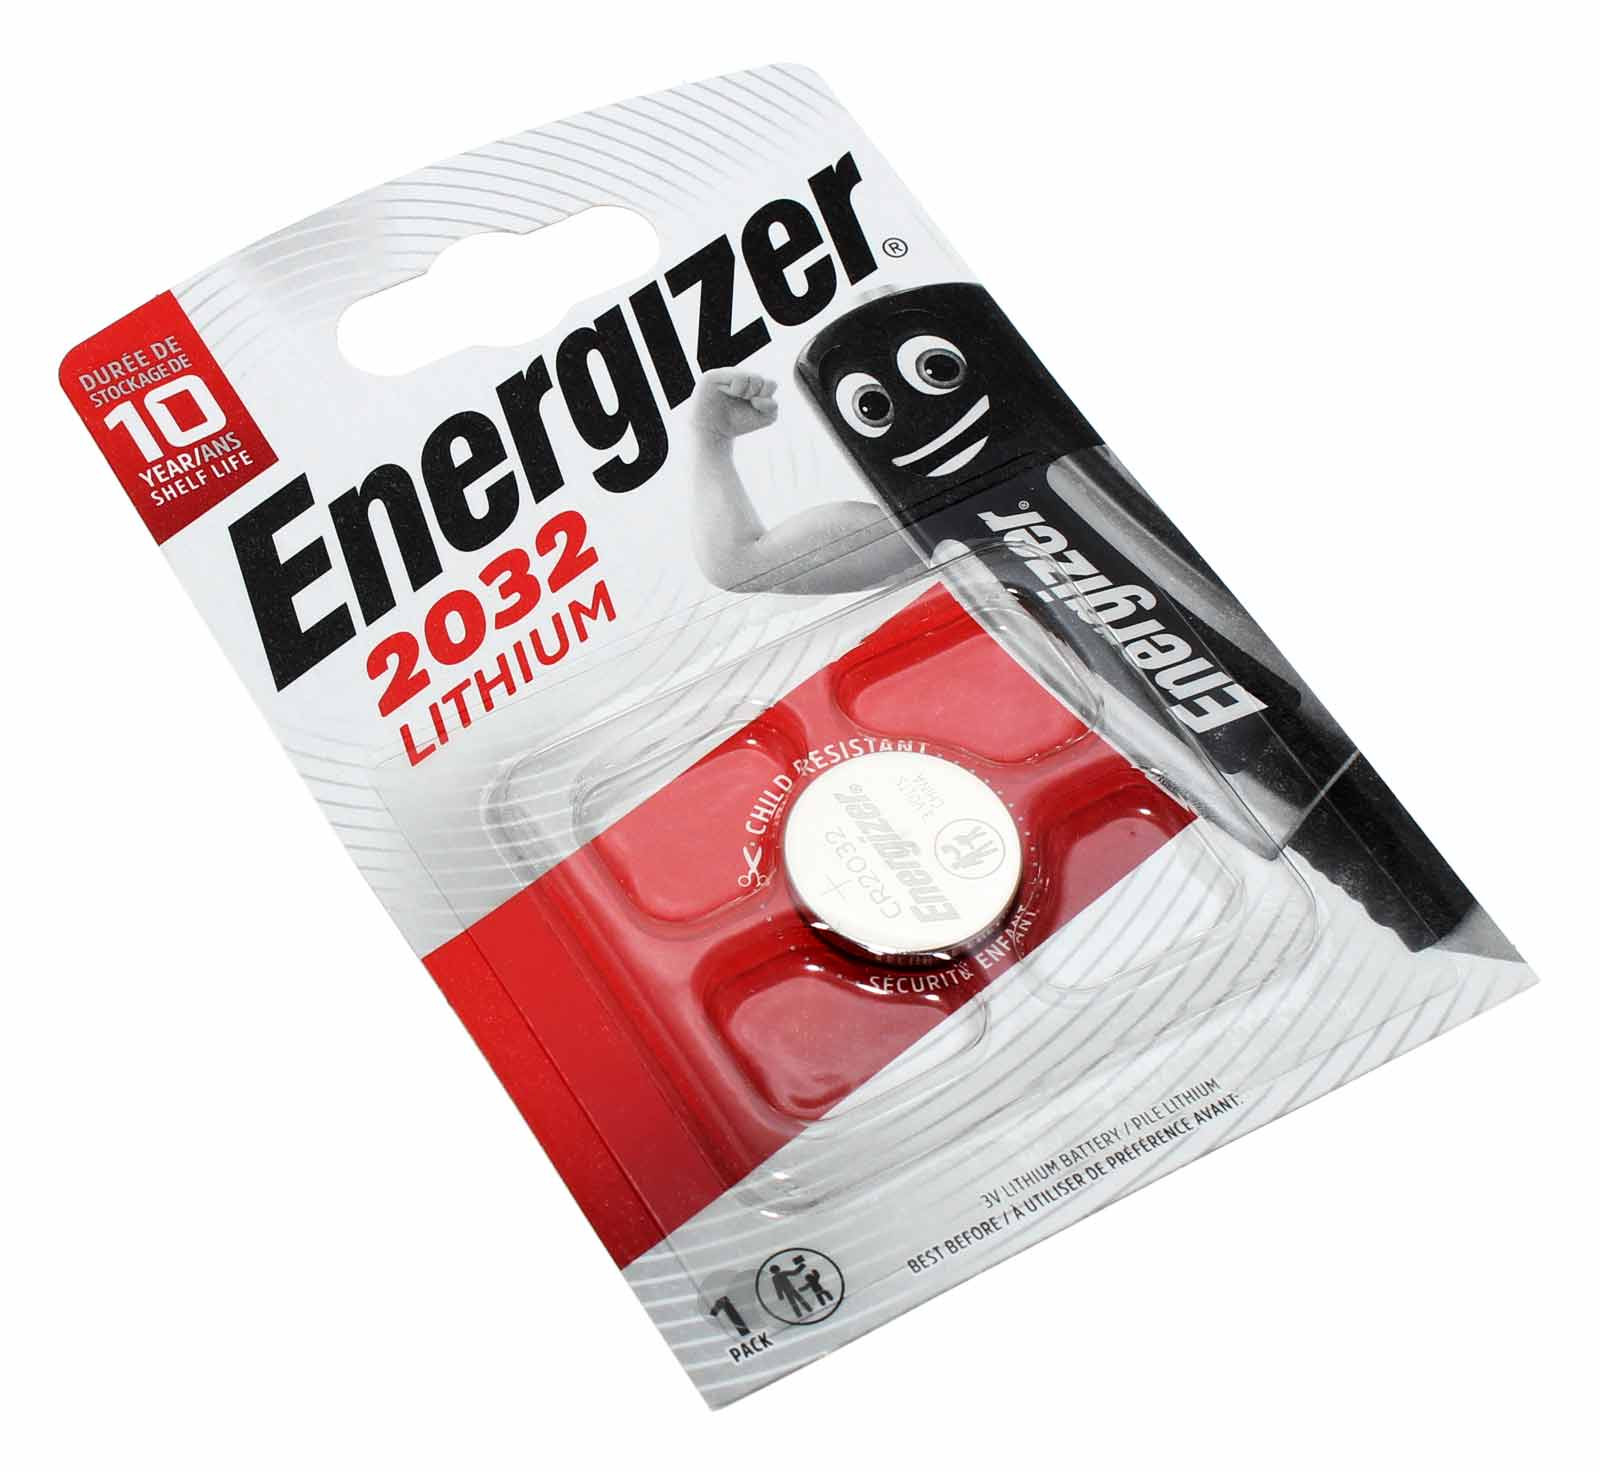 Energizer 2032 Lithium Knopfzelle Batterie (CR2032), 5004LC KCR2032 LM2032